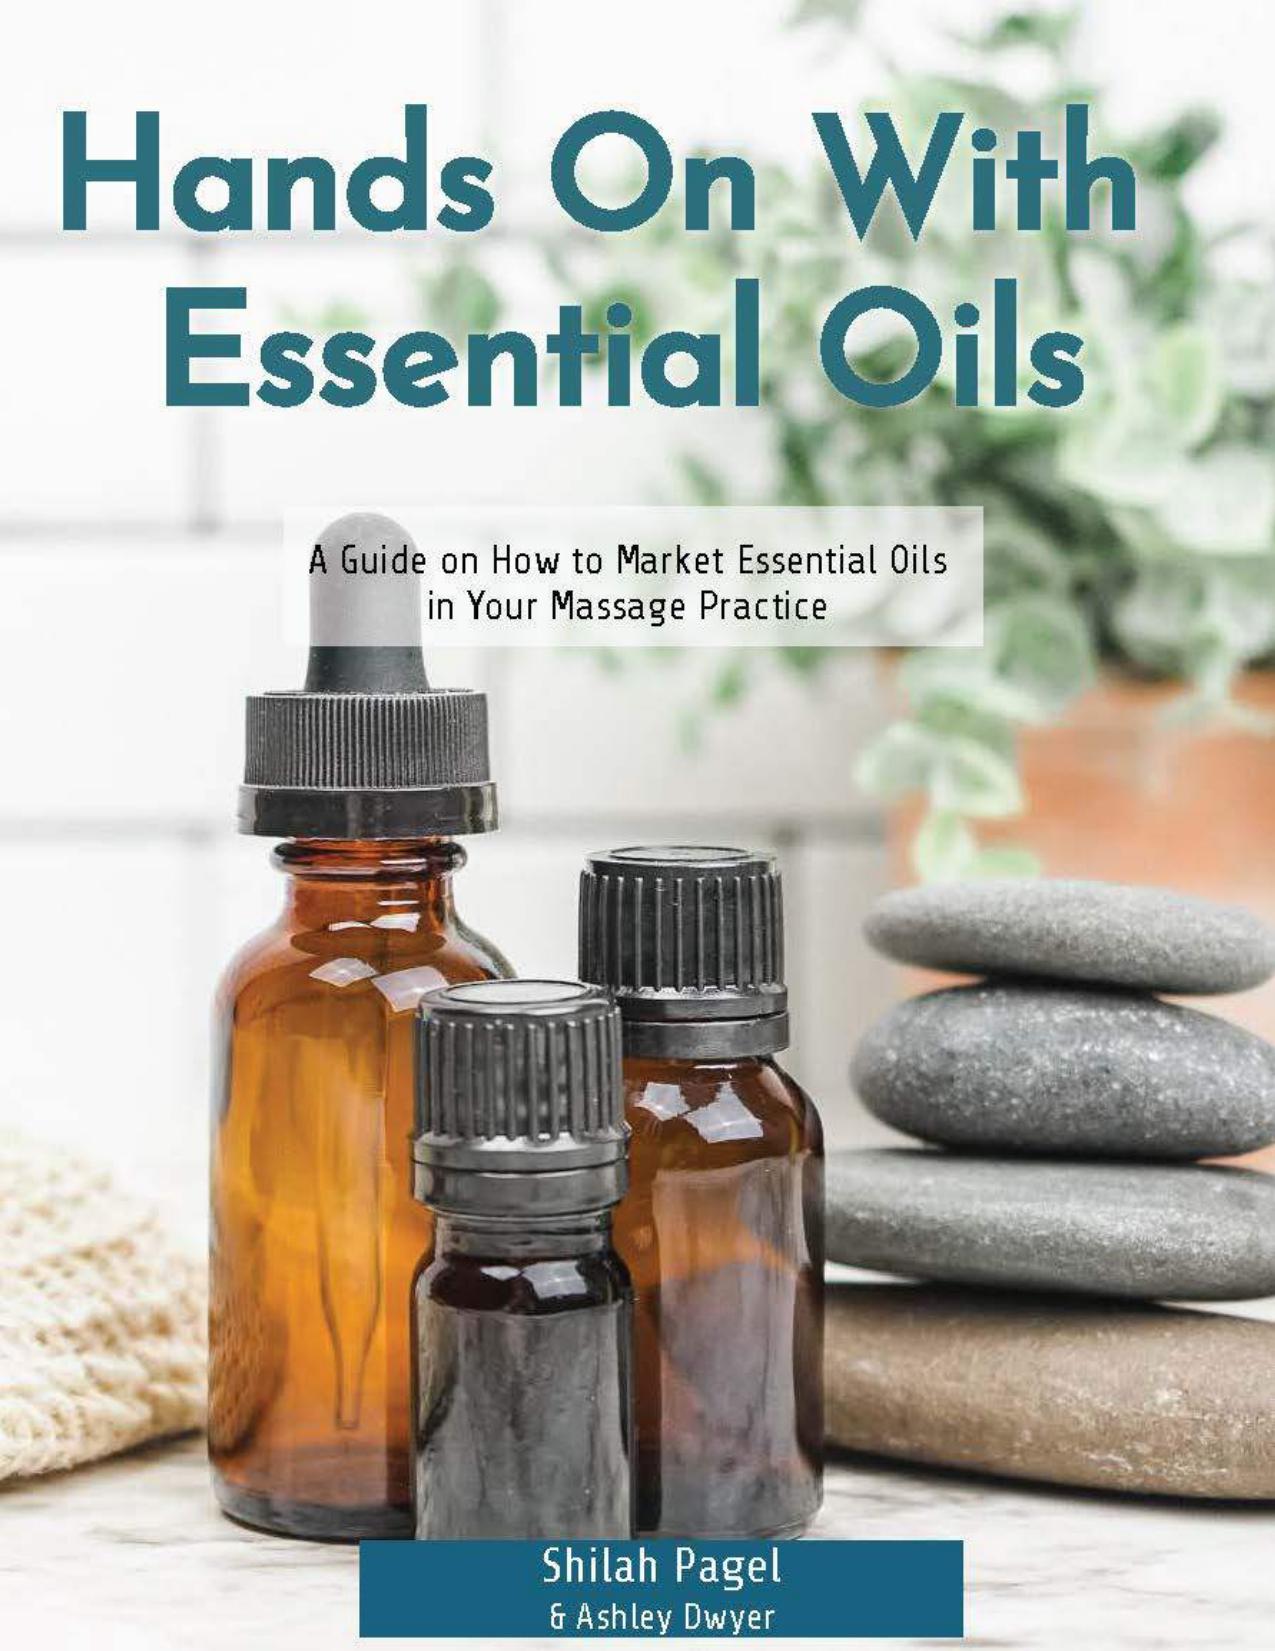 Hands On With Essential Oils by Pagel Shilah & Earth Simply